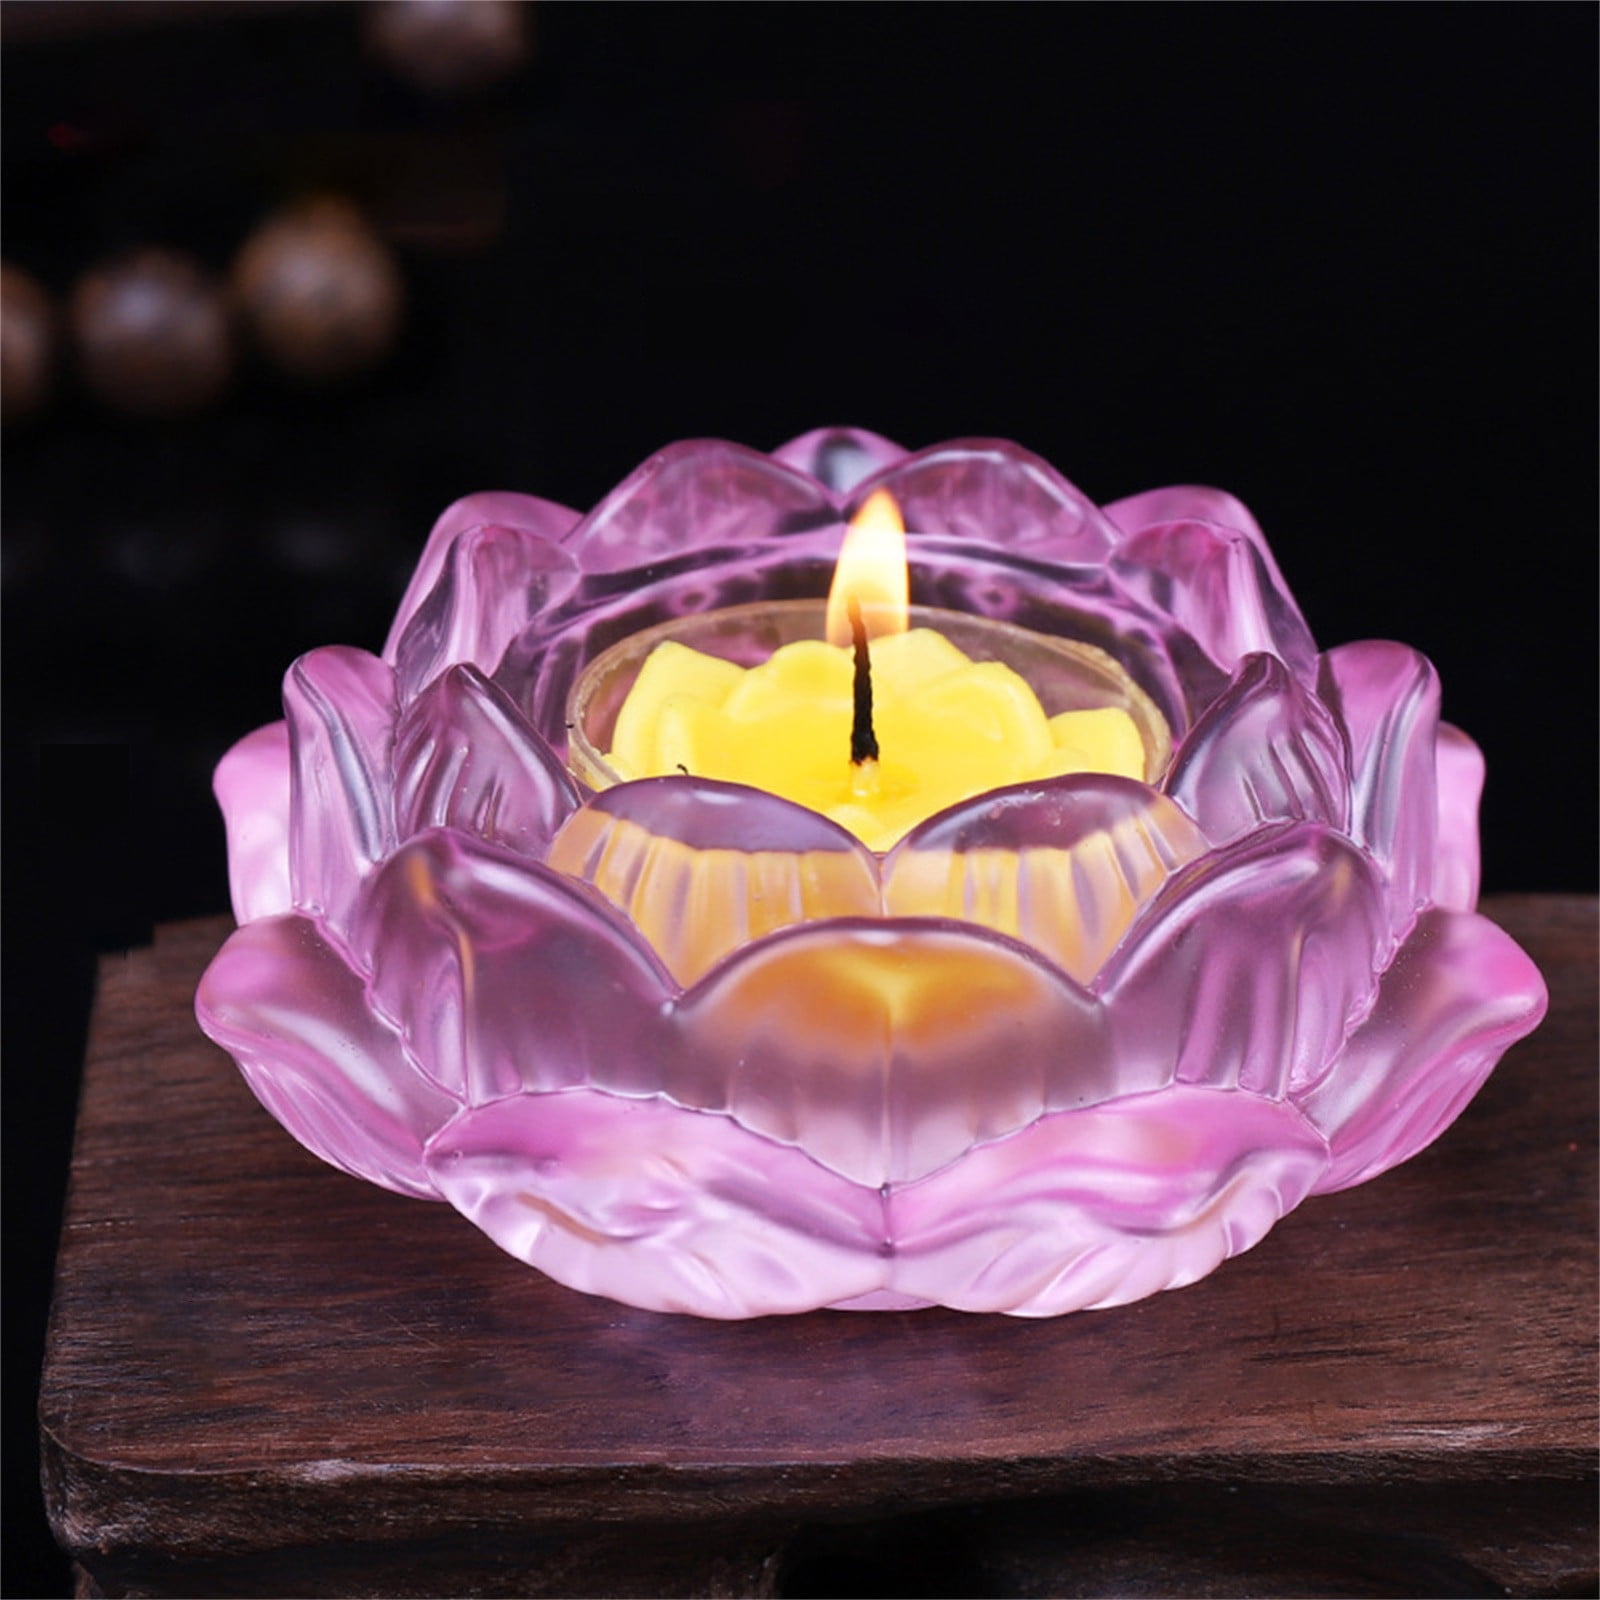 7 Colors Crystal Glass Lotus Flower Candle Tea Light Holder Buddhist Candlestick 